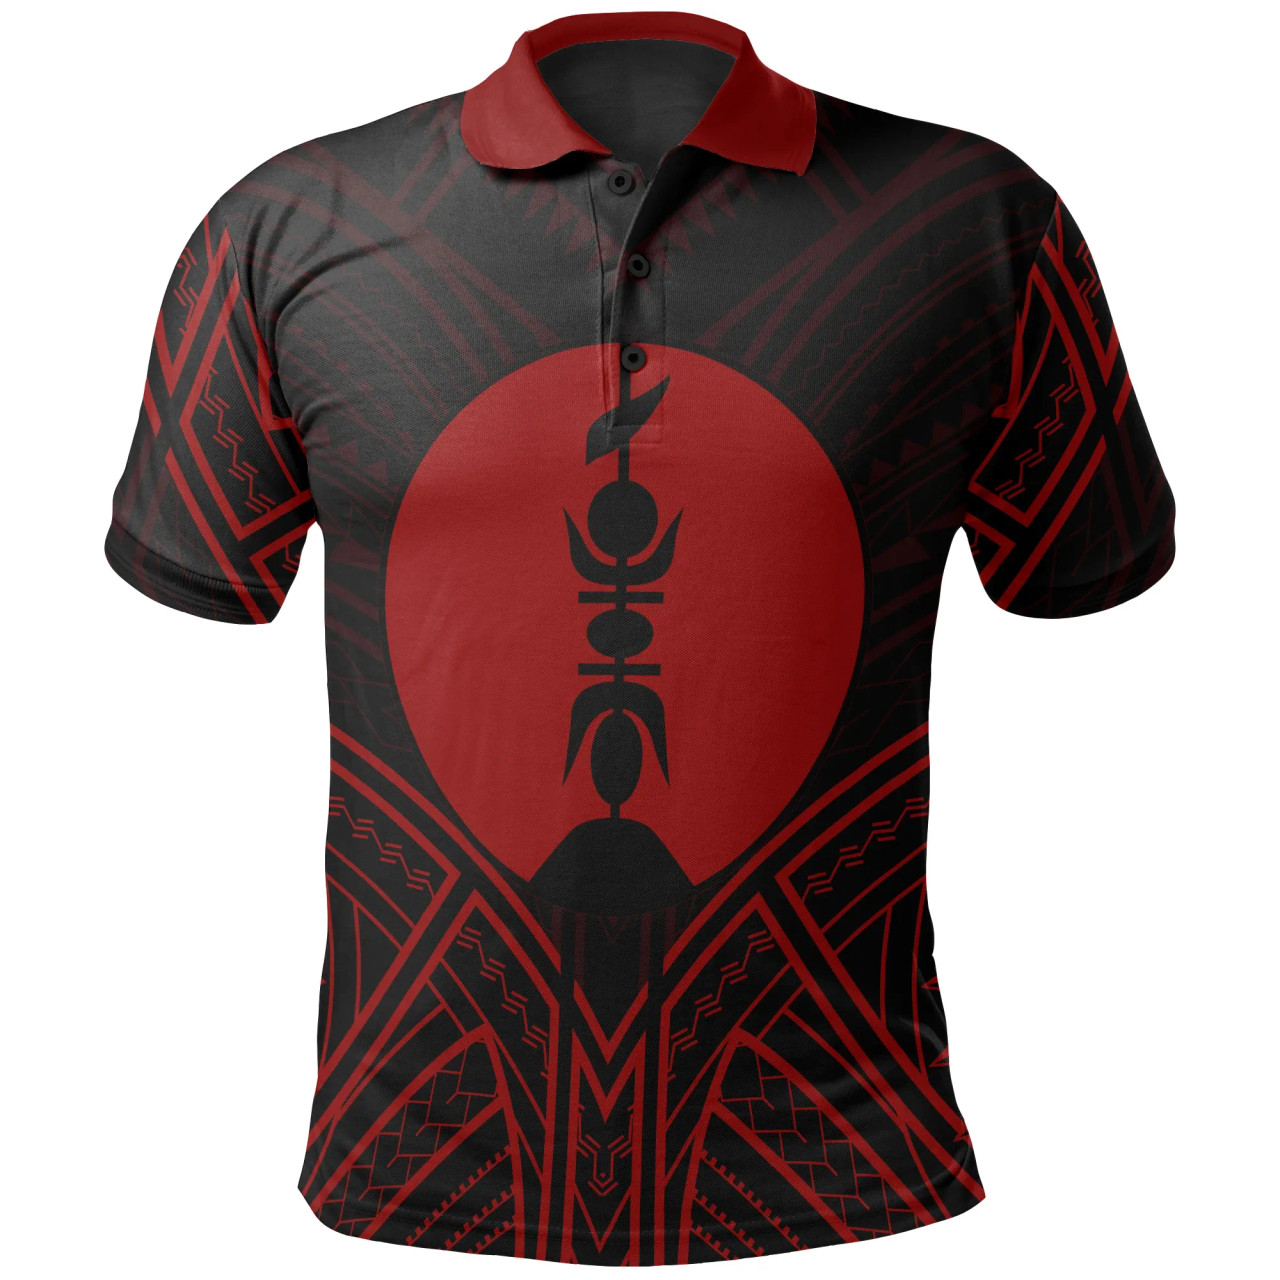 New Caledonia Polo Shirt - New Caledonia Seal Red Tribal Patterns 1